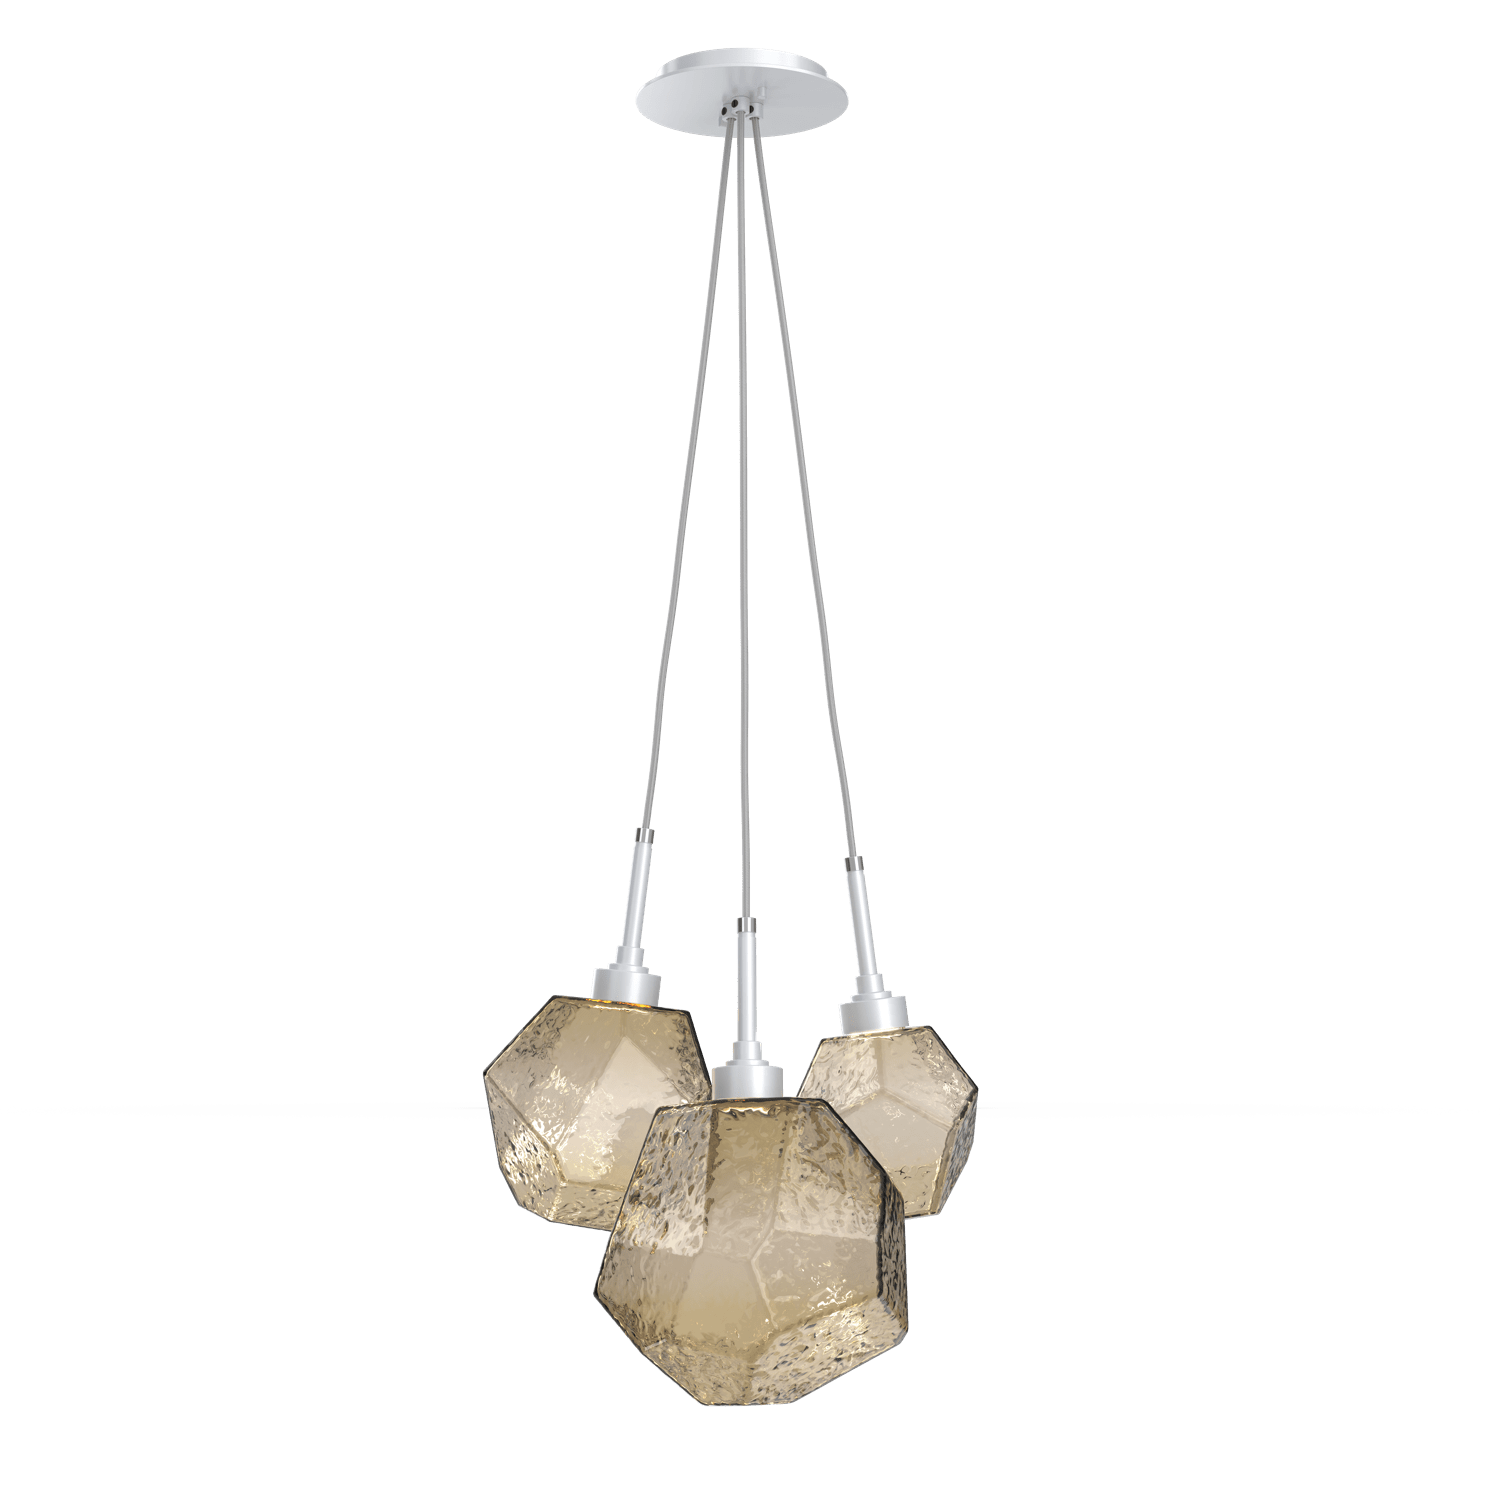 CHB0039-0E-CS-B-Hammerton-Studio-Gem-3-light-cluster-pendant-light-with-classic-silver-finish-and-bronze-blown-glass-shades-and-LED-lamping